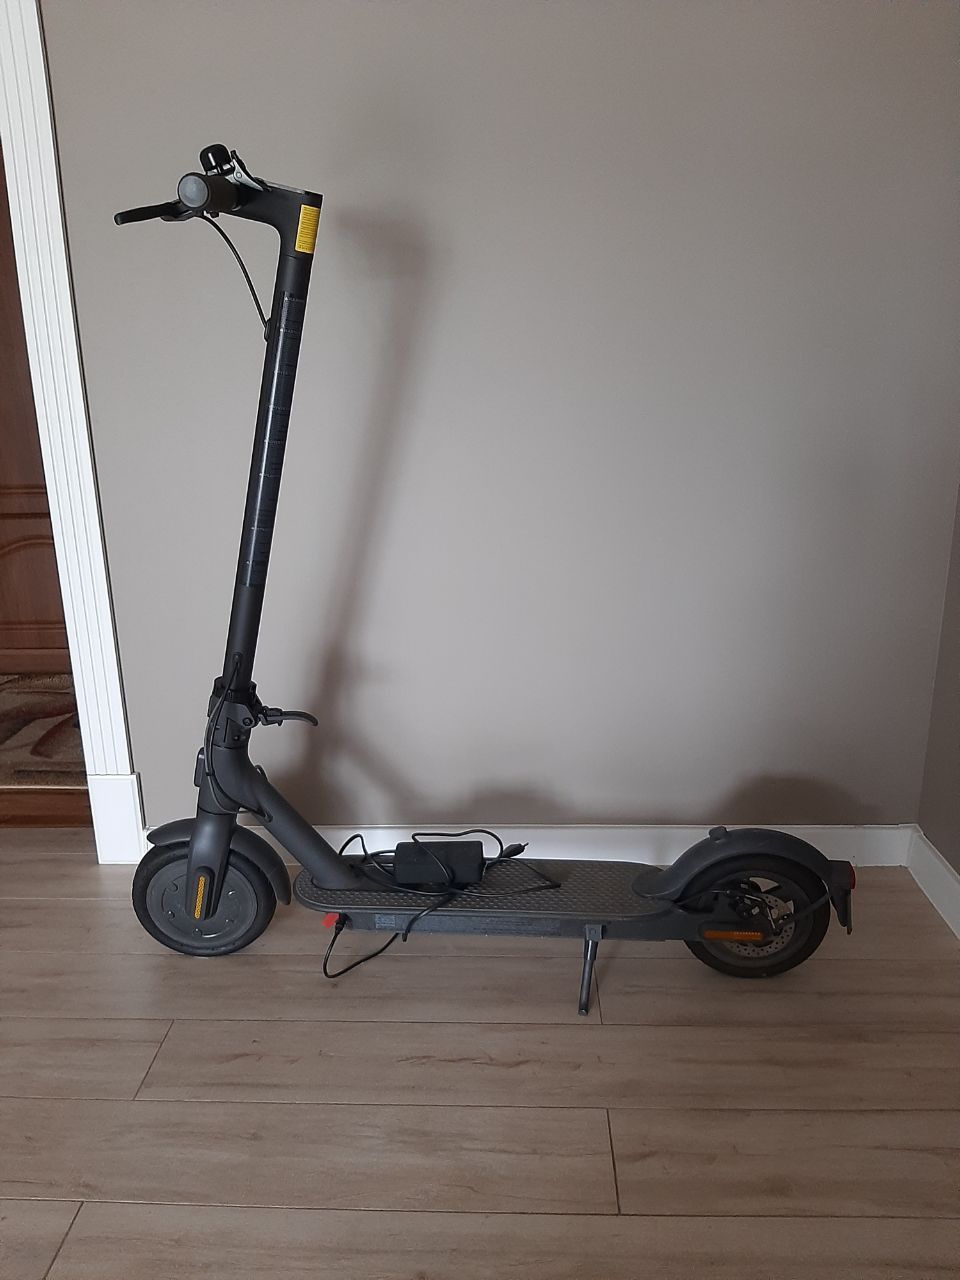 Электросамокат Mi Electric Scooter Essential